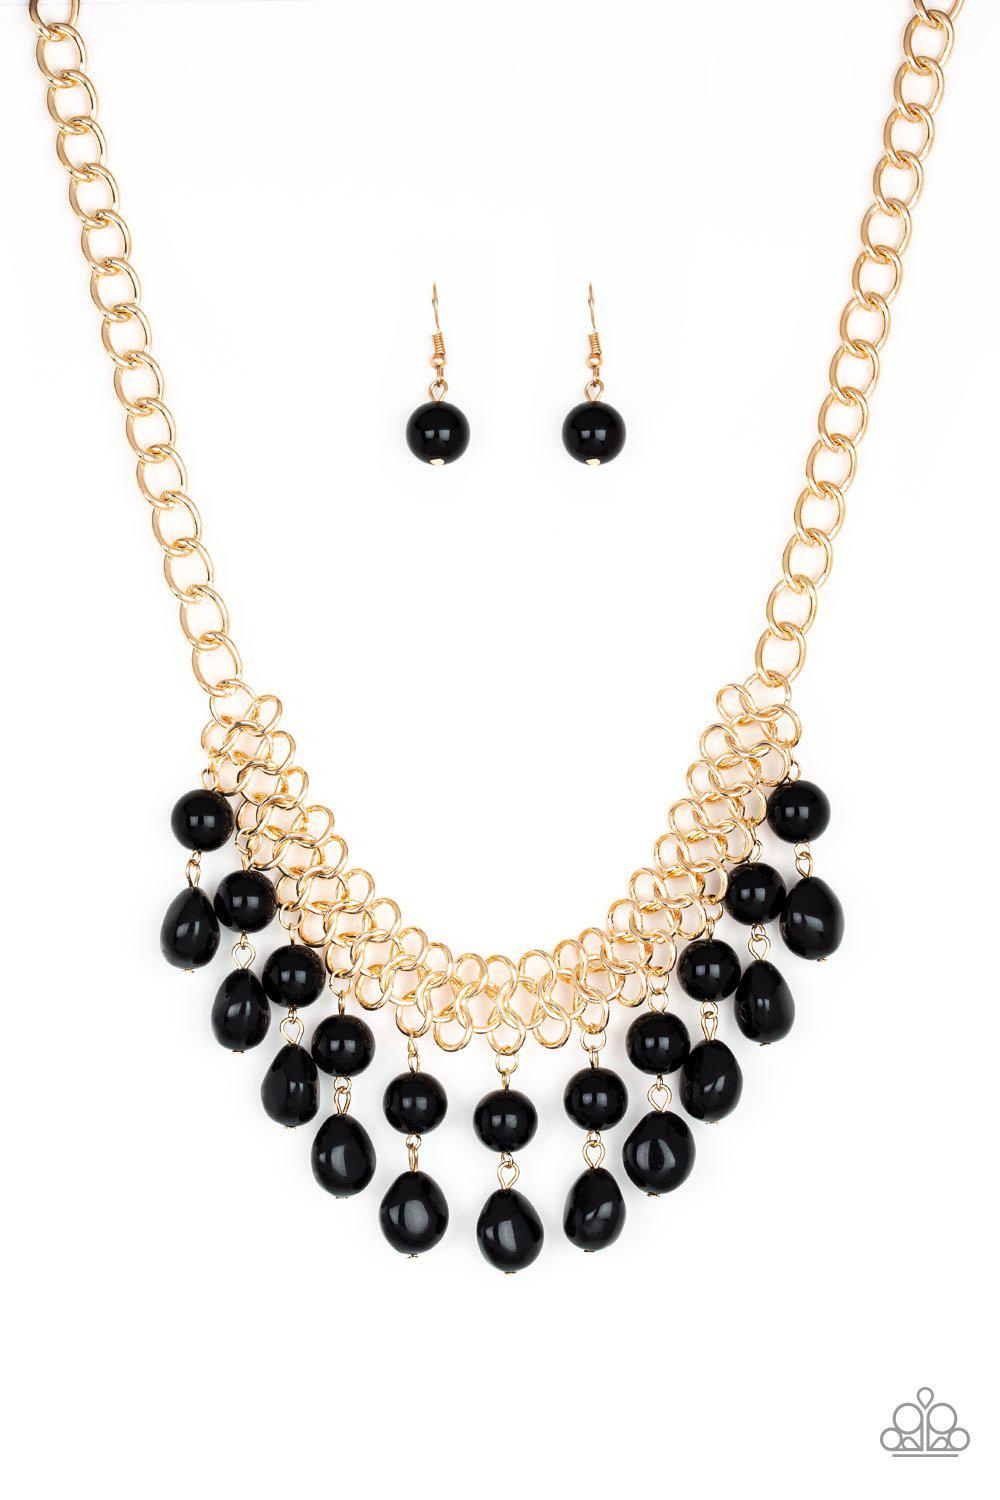 5th Avenue Fleek Black and Gold Necklace - Paparazzi Accessories - lightbox -CarasShop.com - $5 Jewelry by Cara Jewels